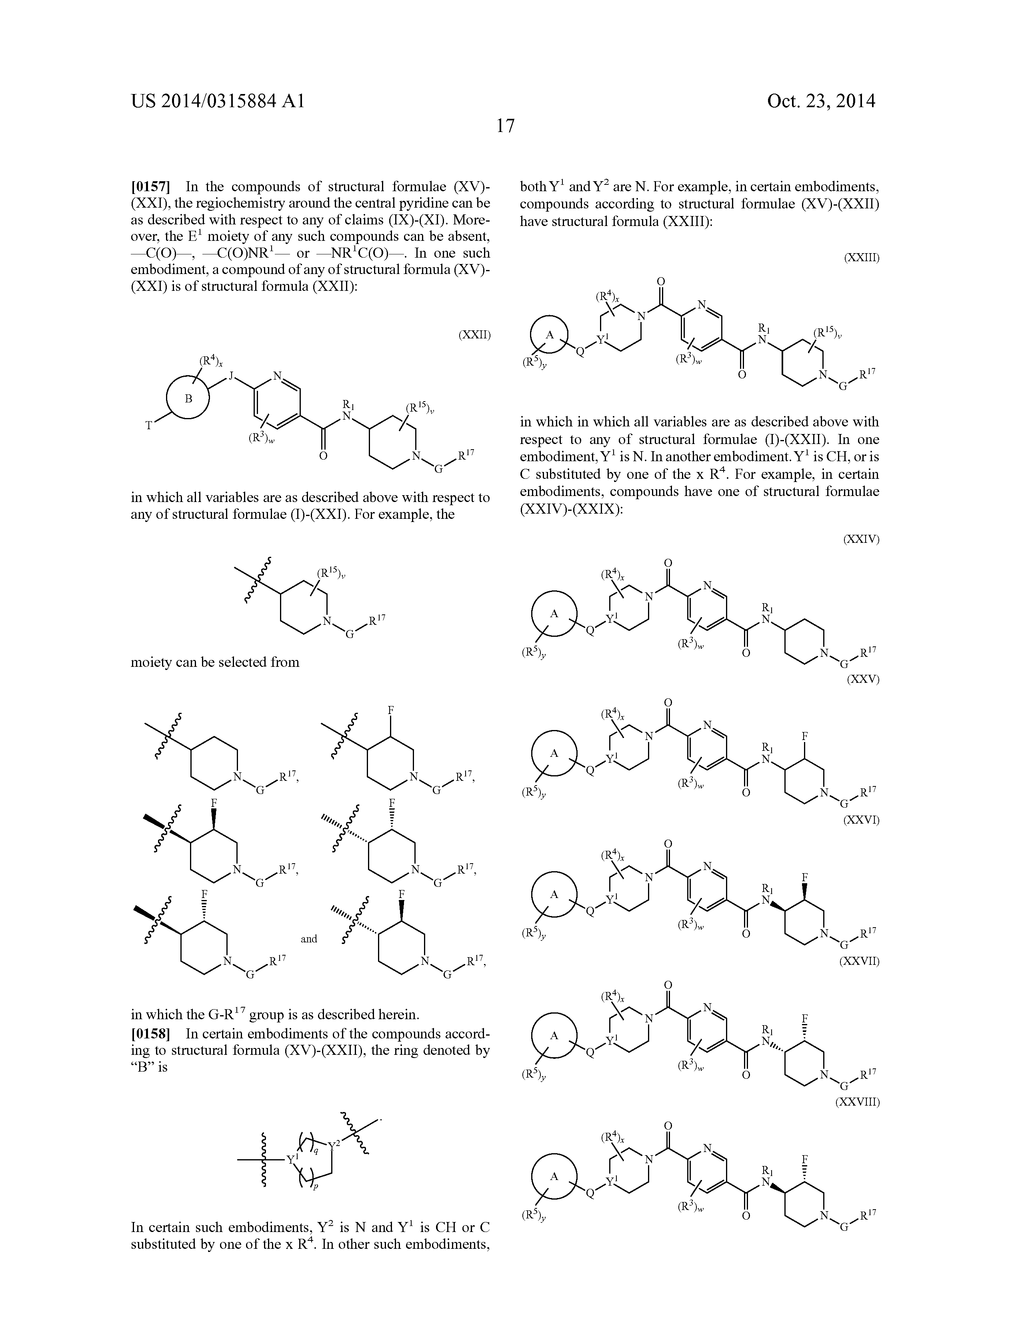 AMPK-ACTIVATING HETEROCYCLIC COMPOUNDS AND METHODS FOR USING THE SAME - diagram, schematic, and image 18